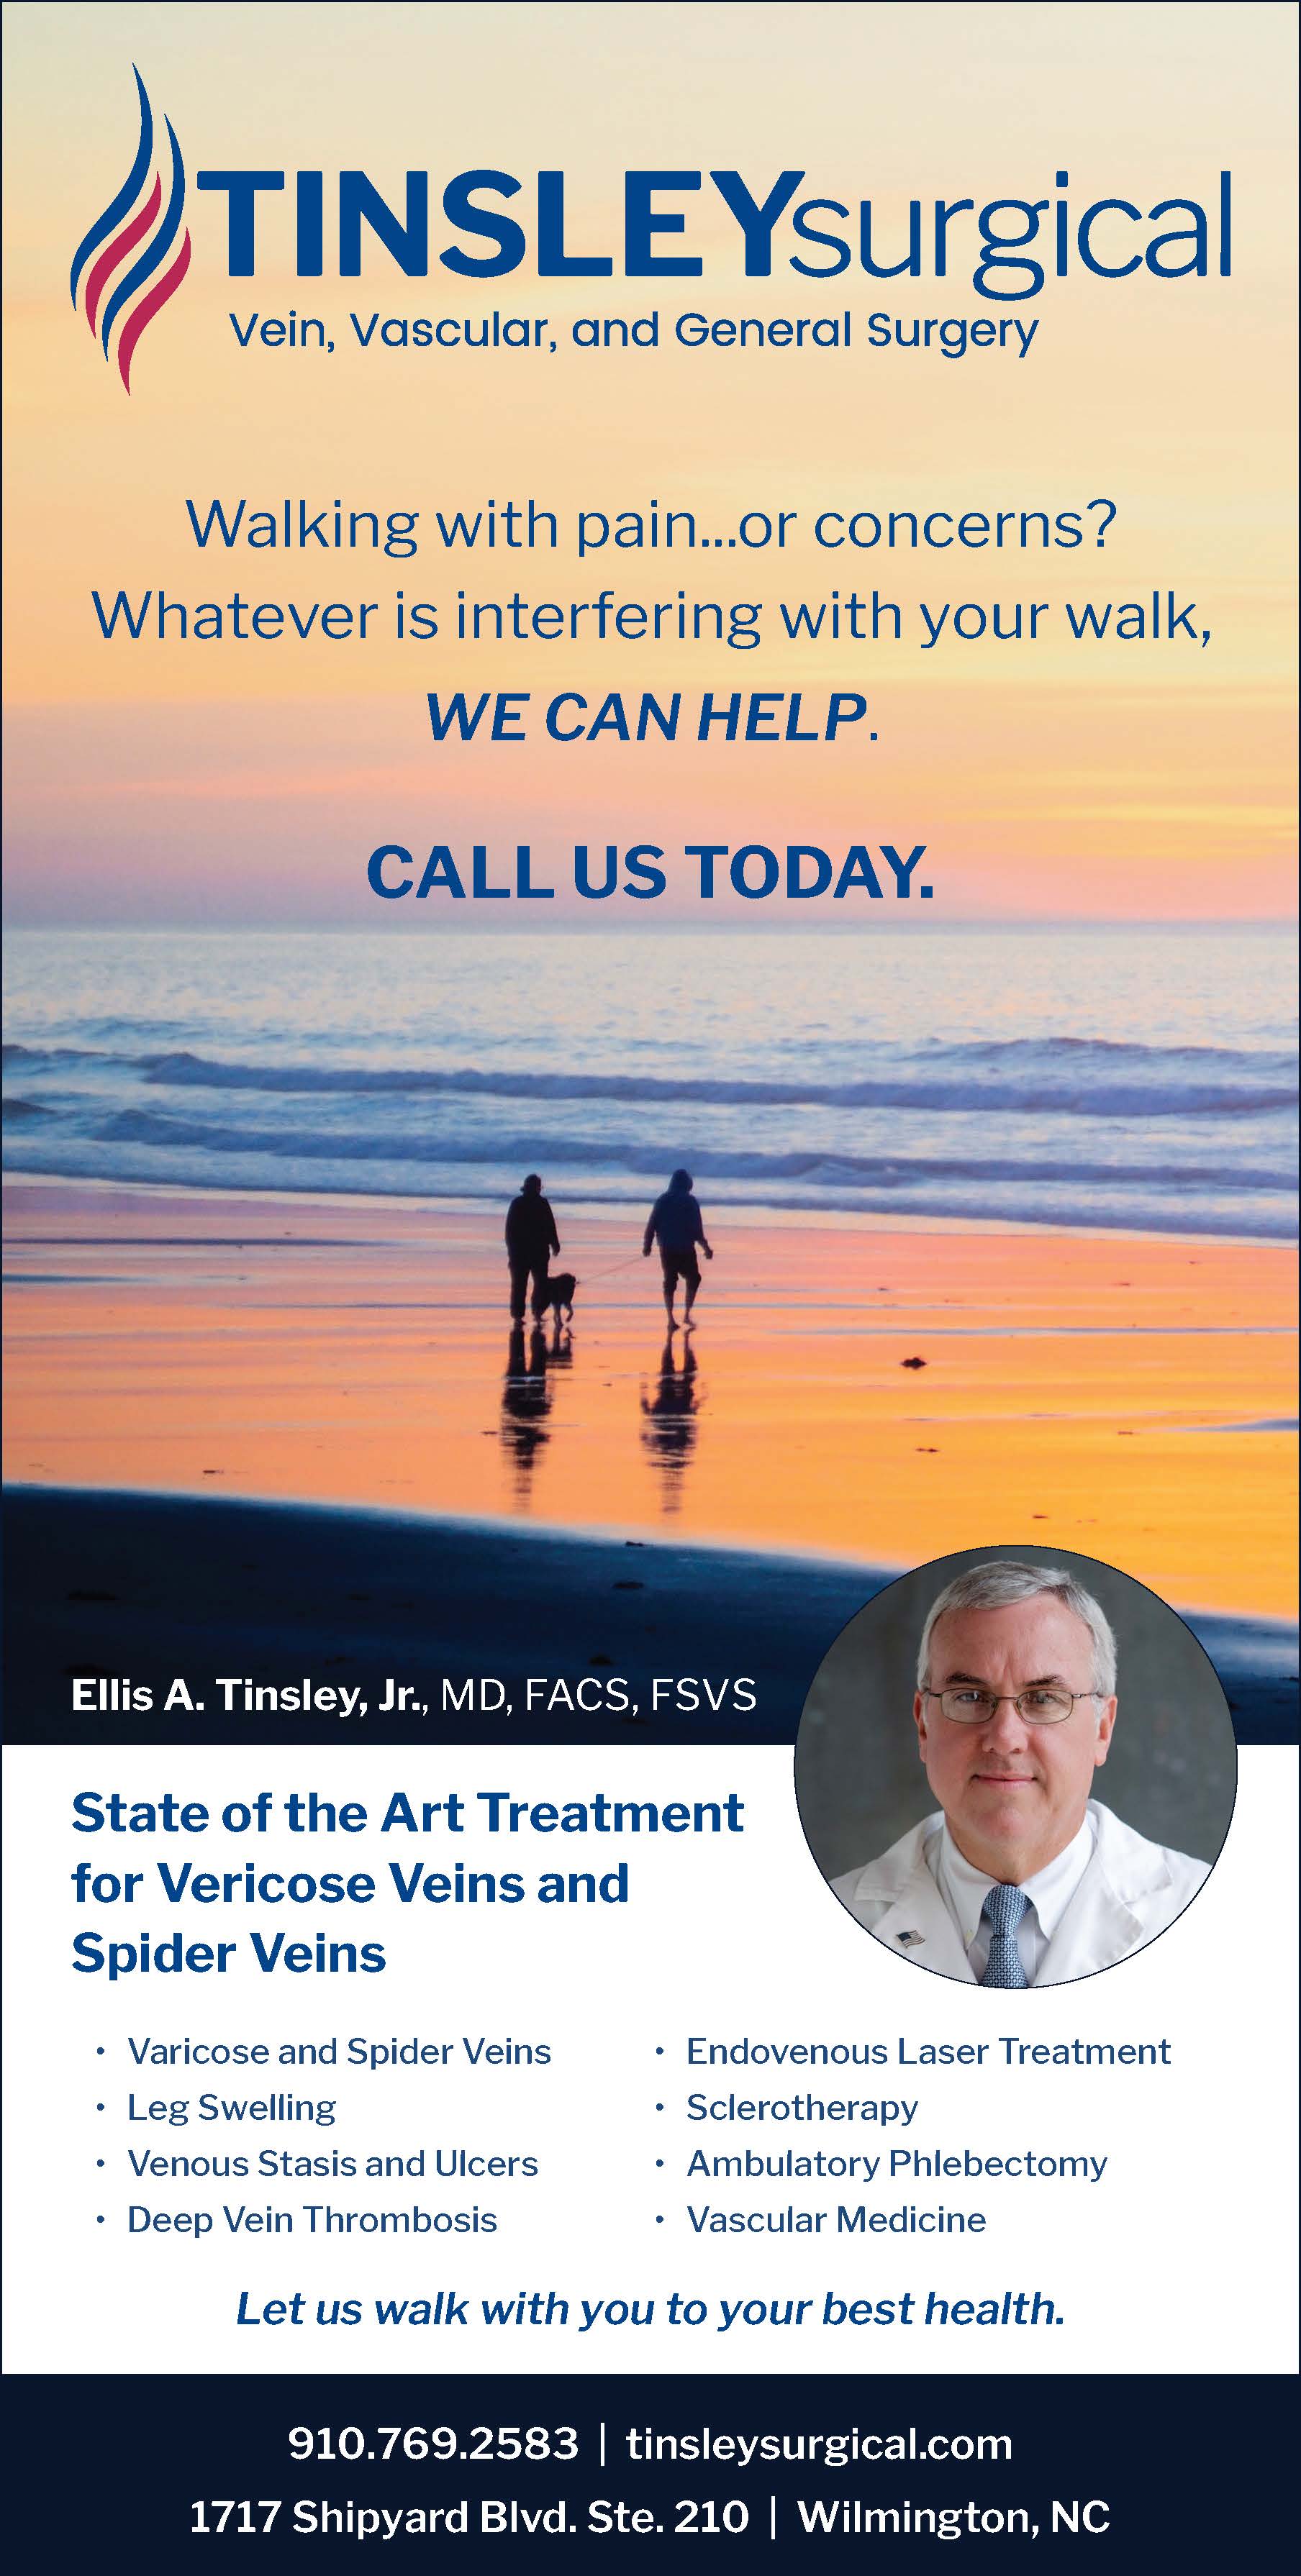 Tinsely Surgical Vein Newspaper Ad Design